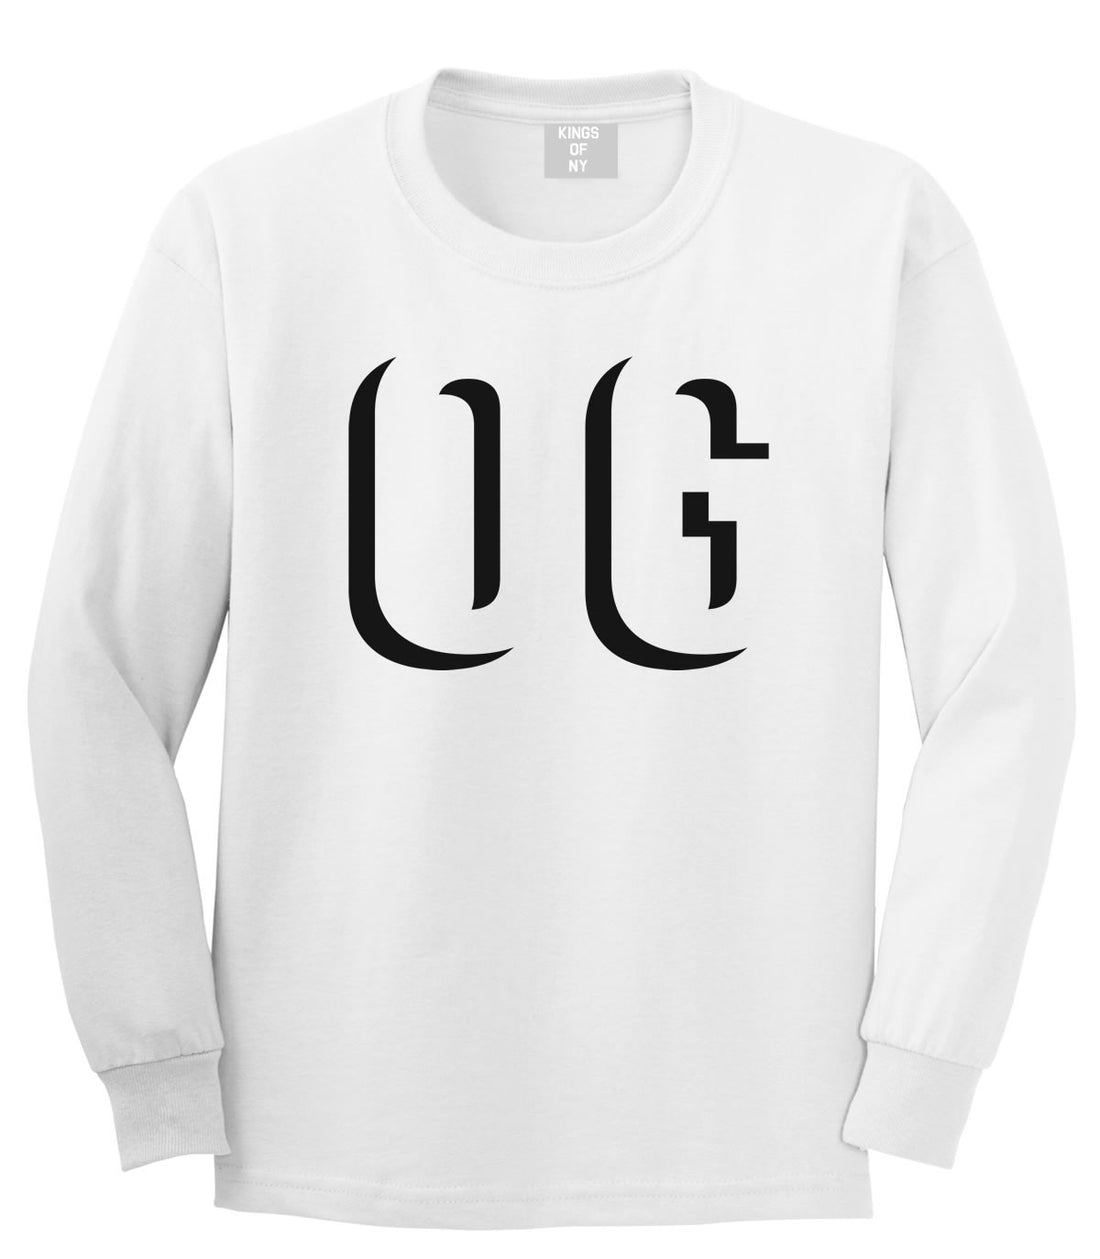 OG Shadow Originial Gangster Boys Kids Long Sleeve T-Shirt in White by Kings Of NY